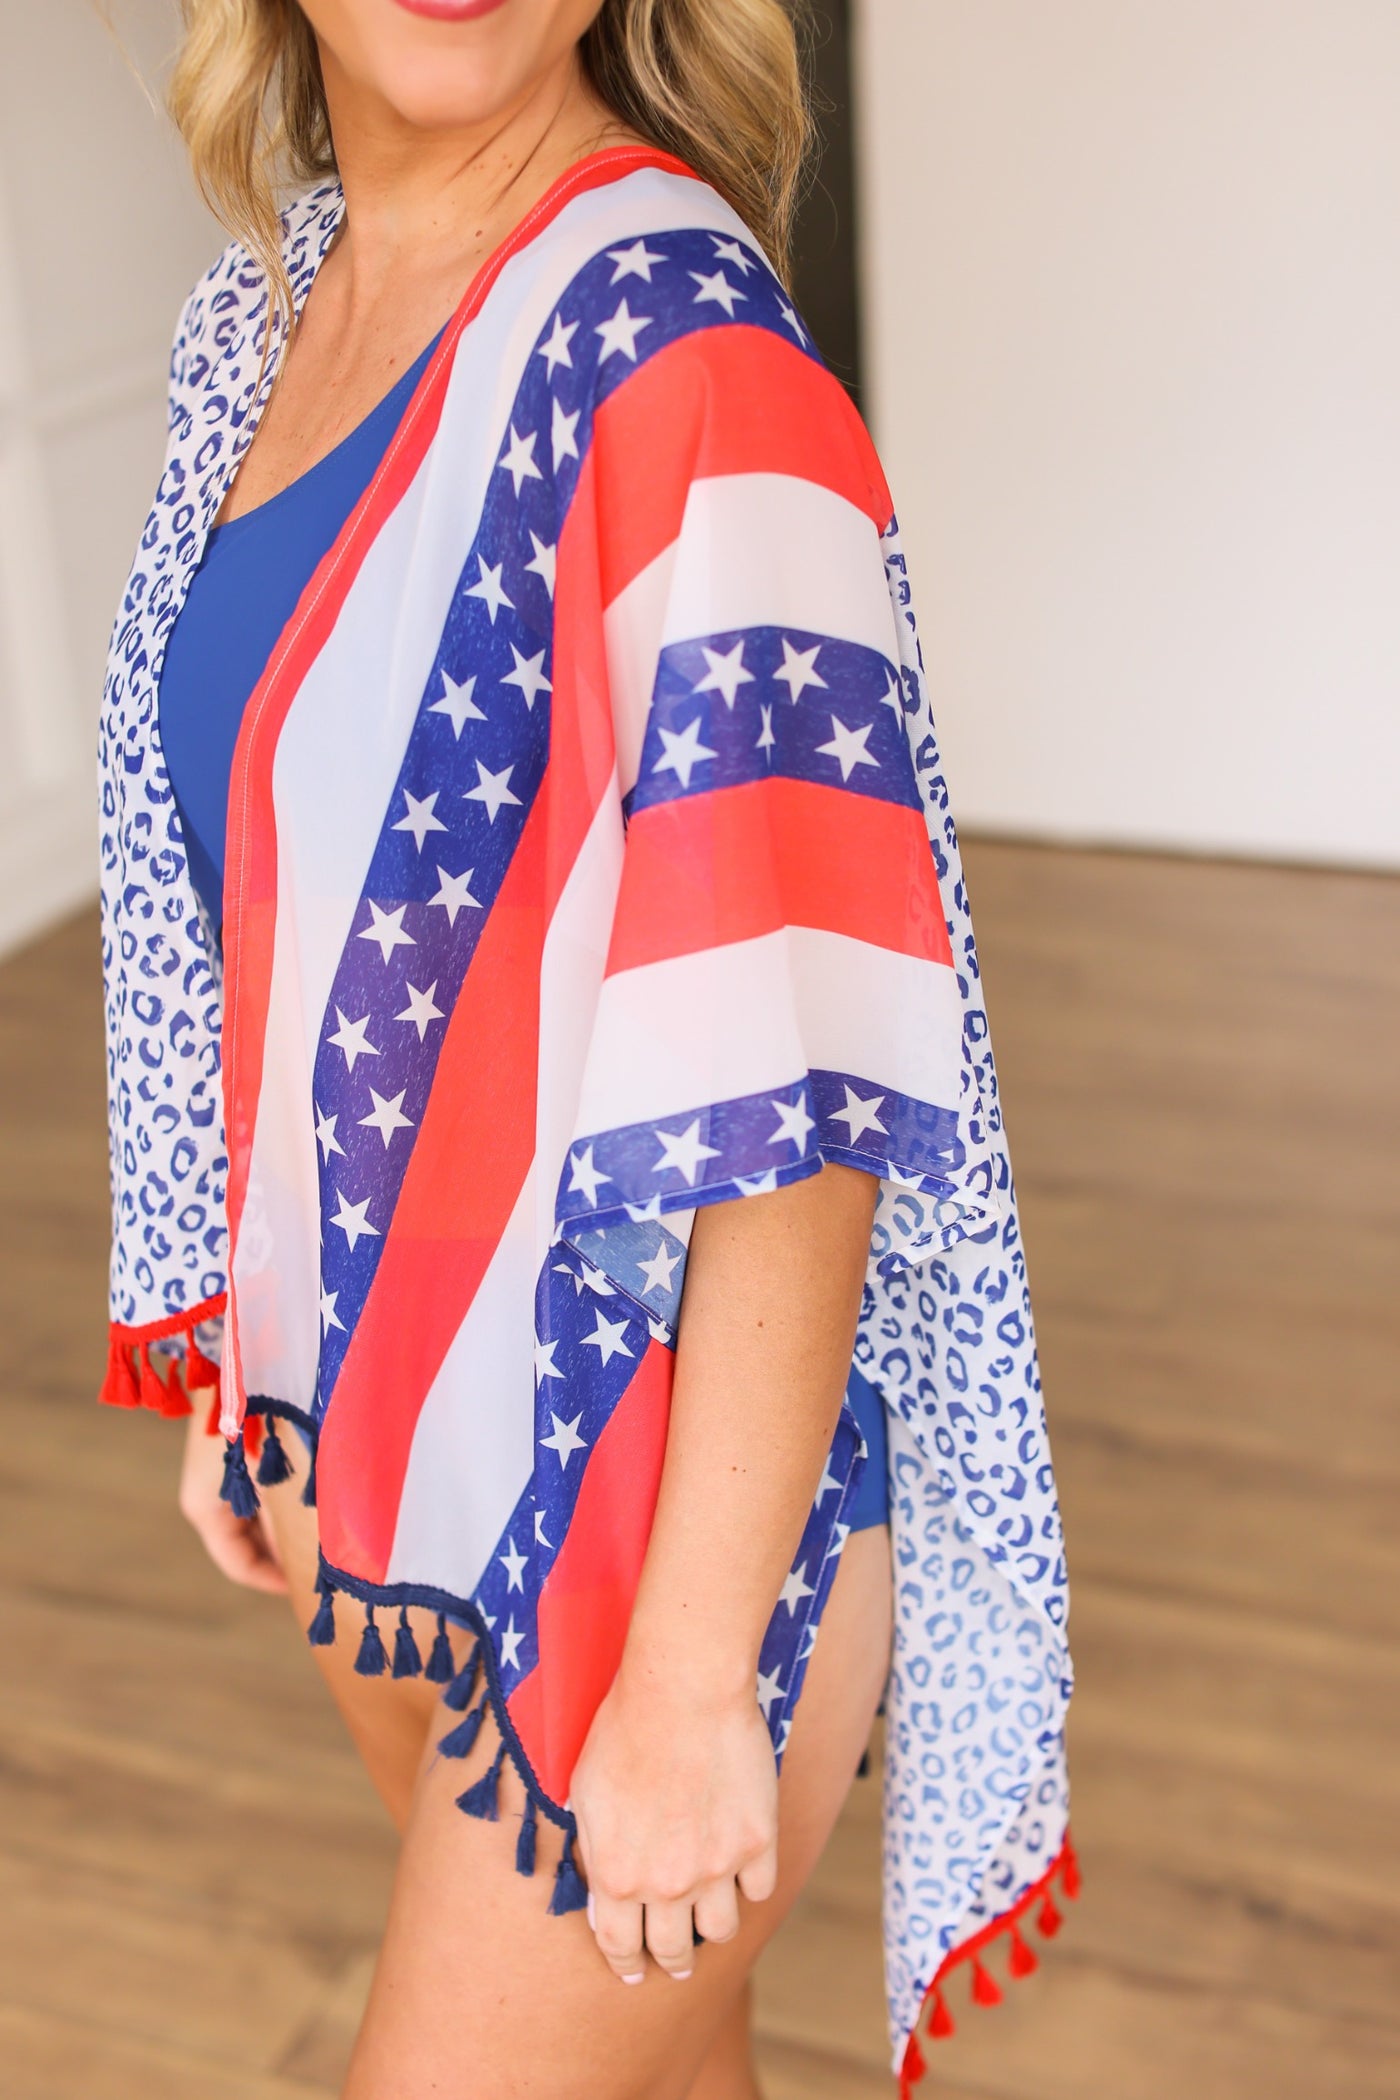 Stars and stripes how about that cover up with blue and red tassels